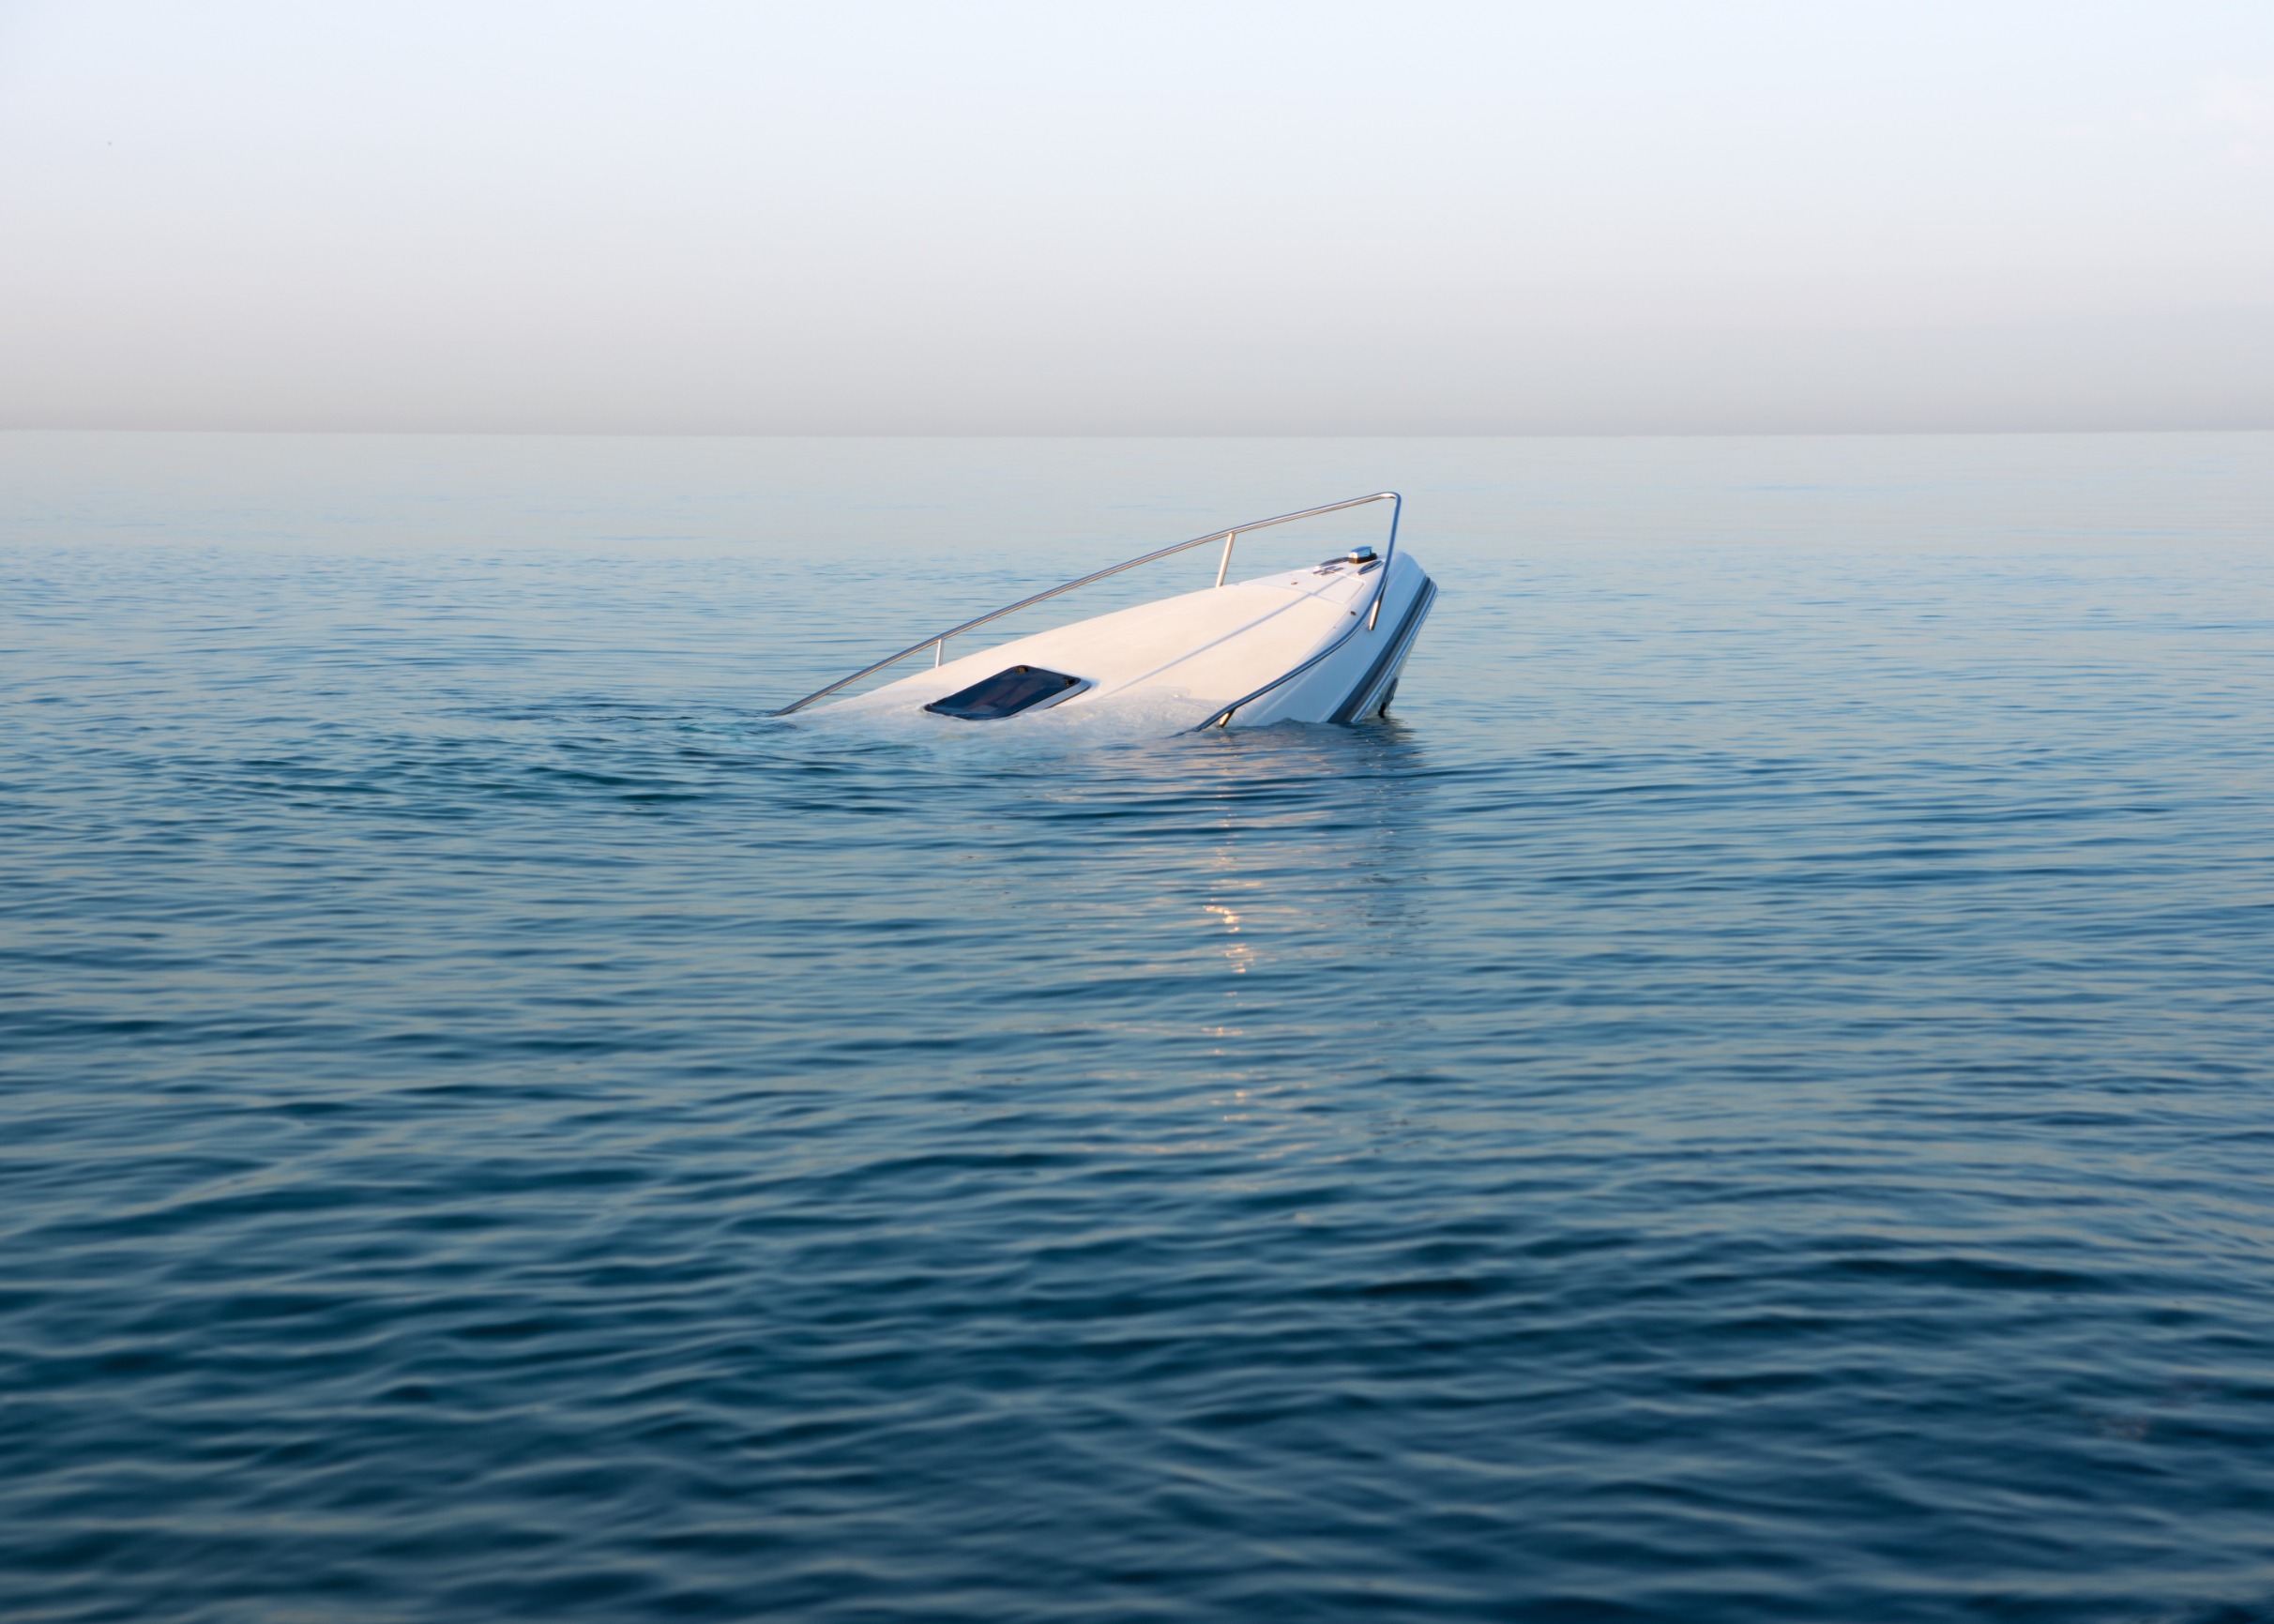 What were the leading causes of 2022 FL boating accidents